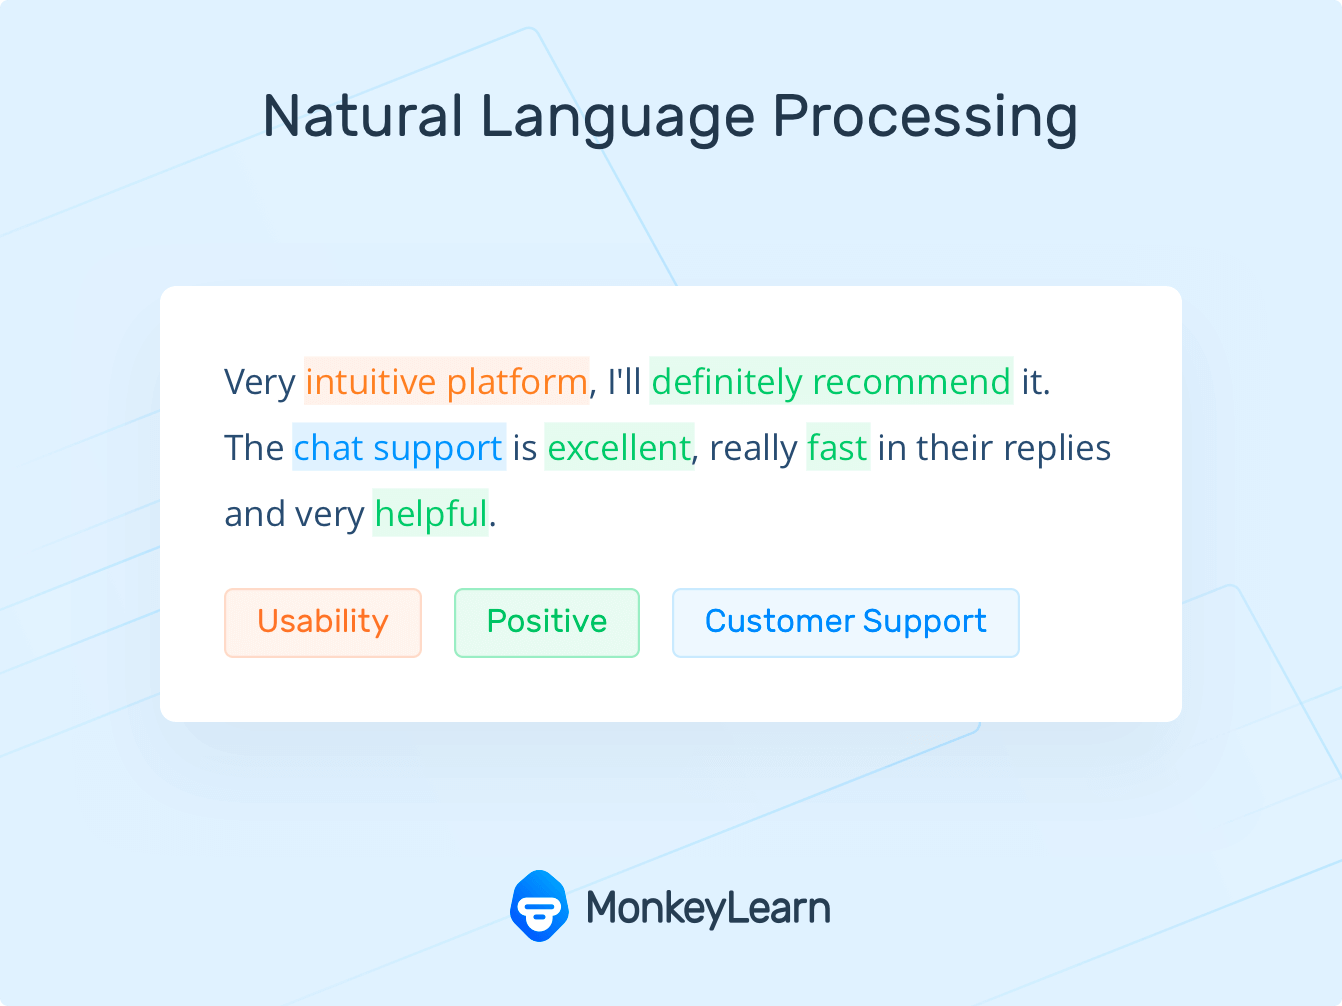 MonkeyLearn example of Natural Language Processing